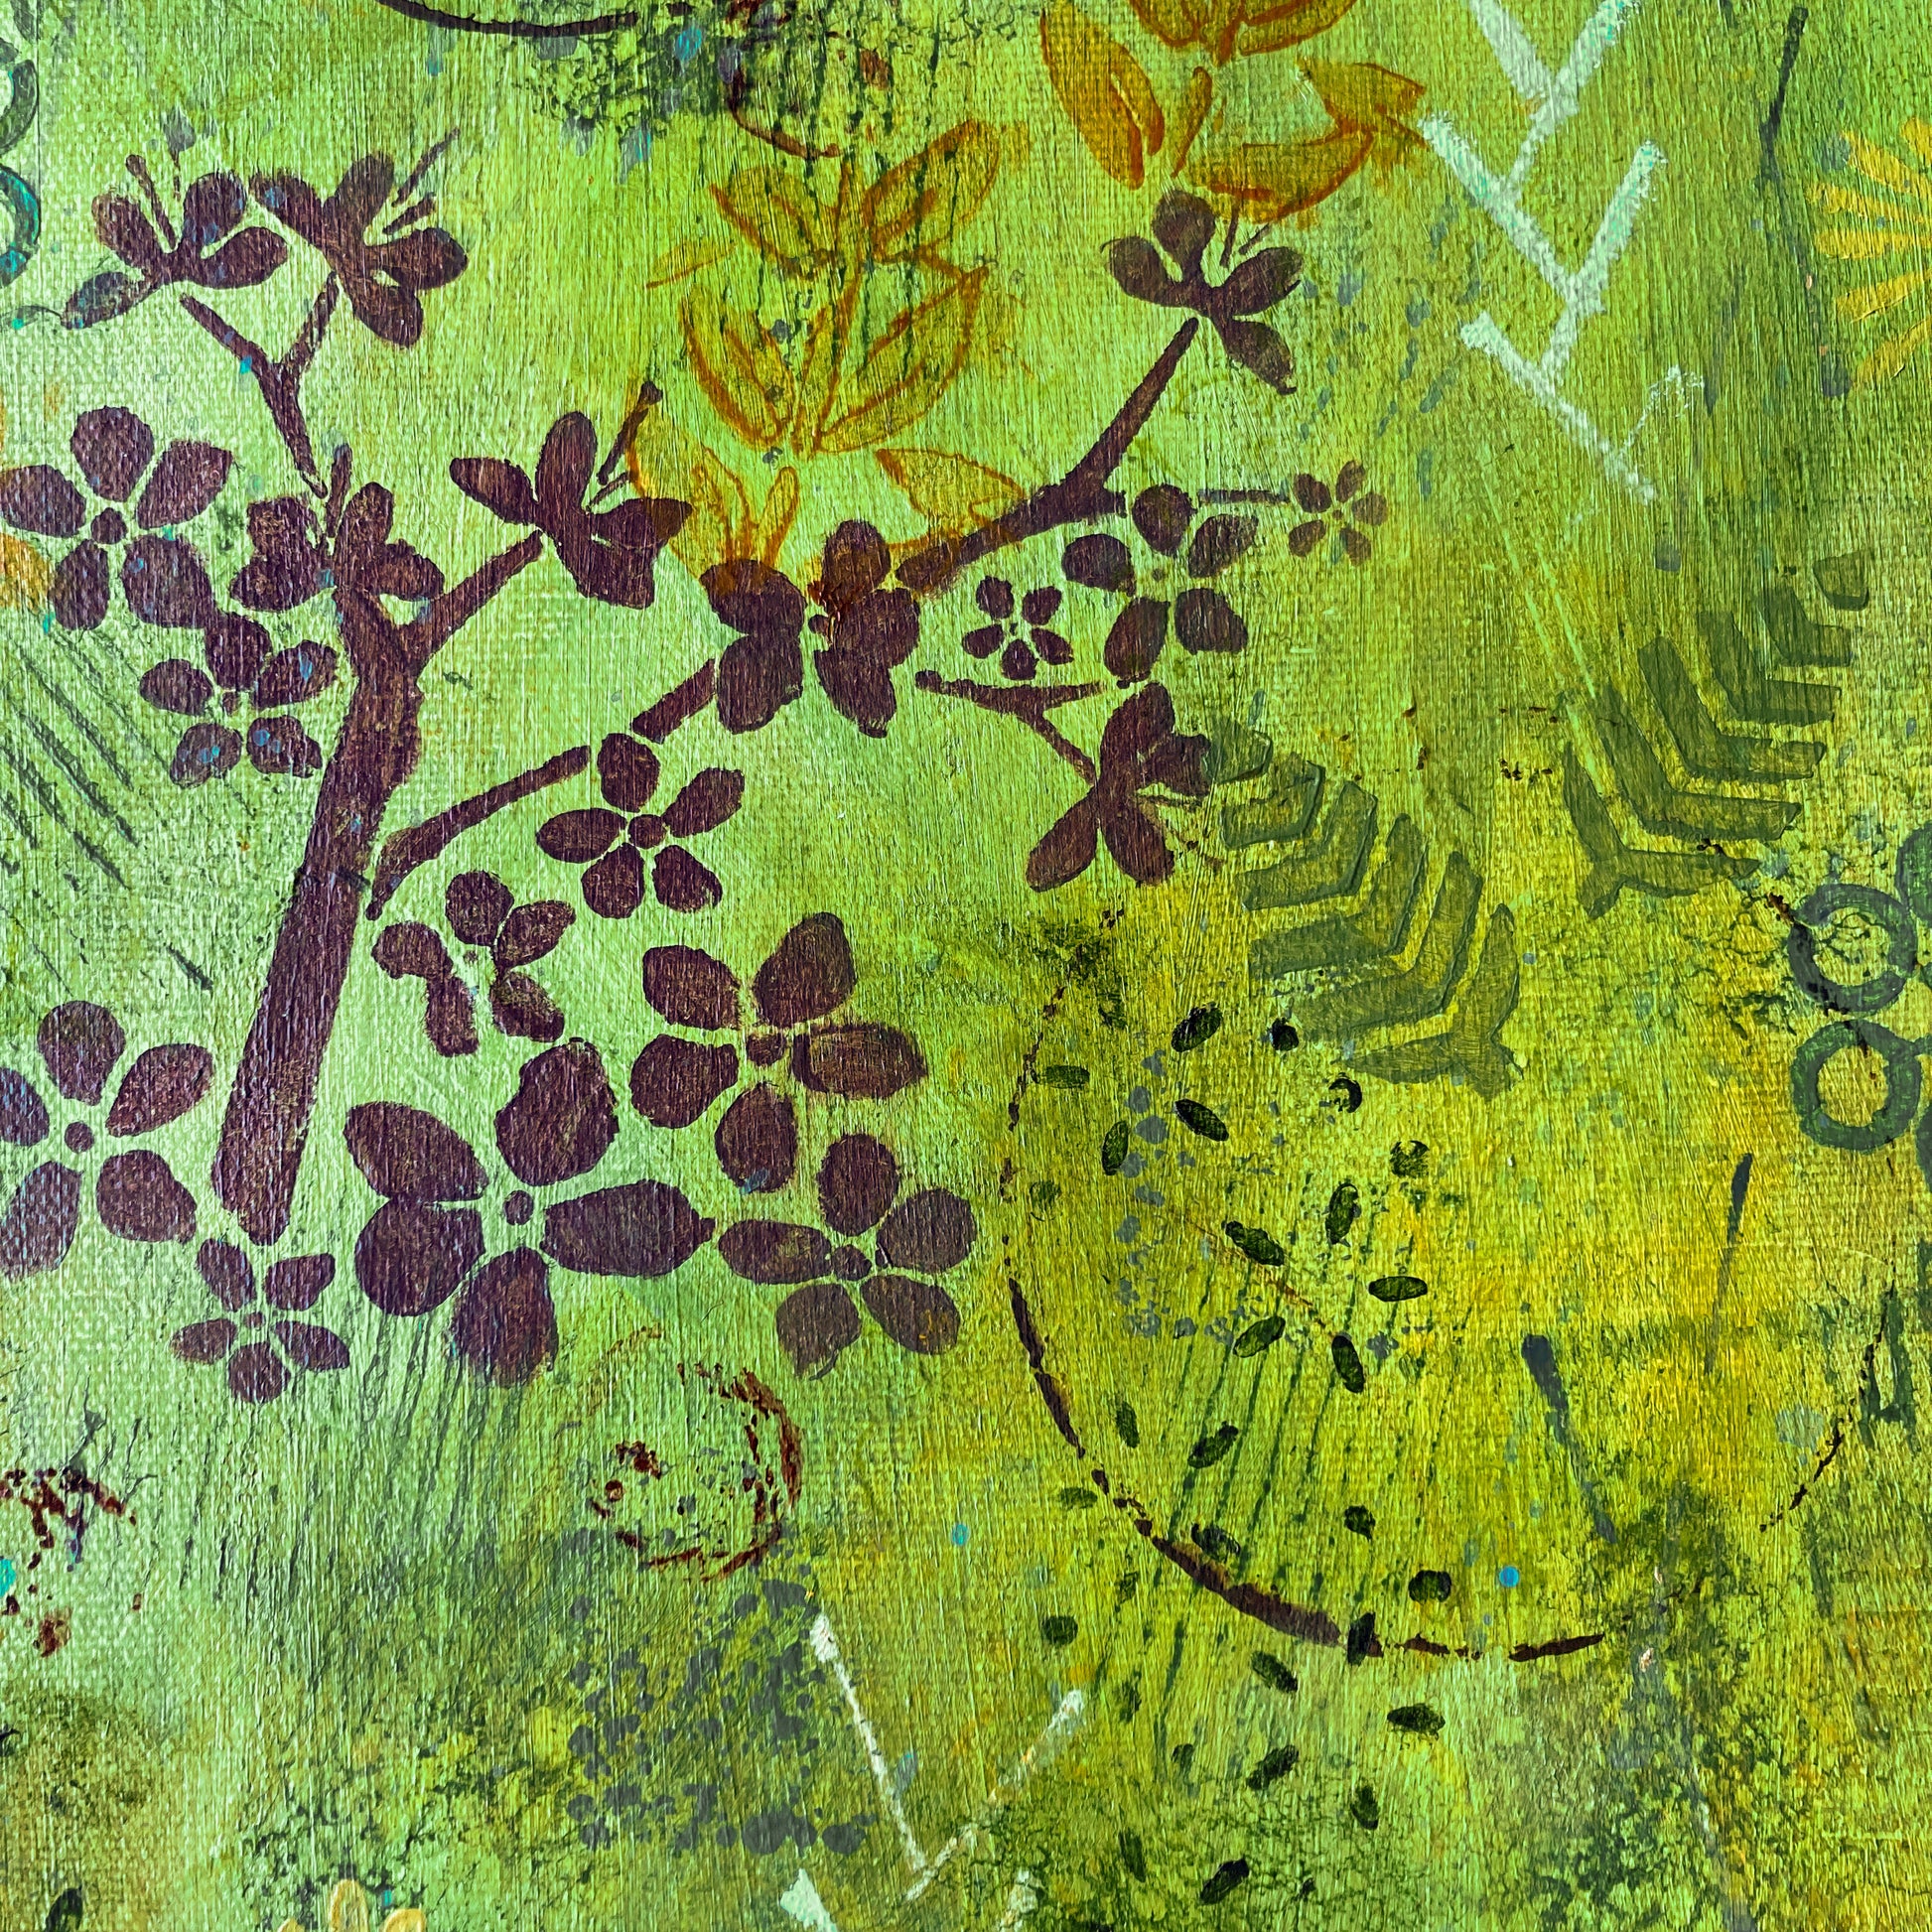 detail view forest theme abstract acrylic painting on canvas green background with purple flowers and dark orange and green leaves forest bathing refreshing leaf scene stencils and movement